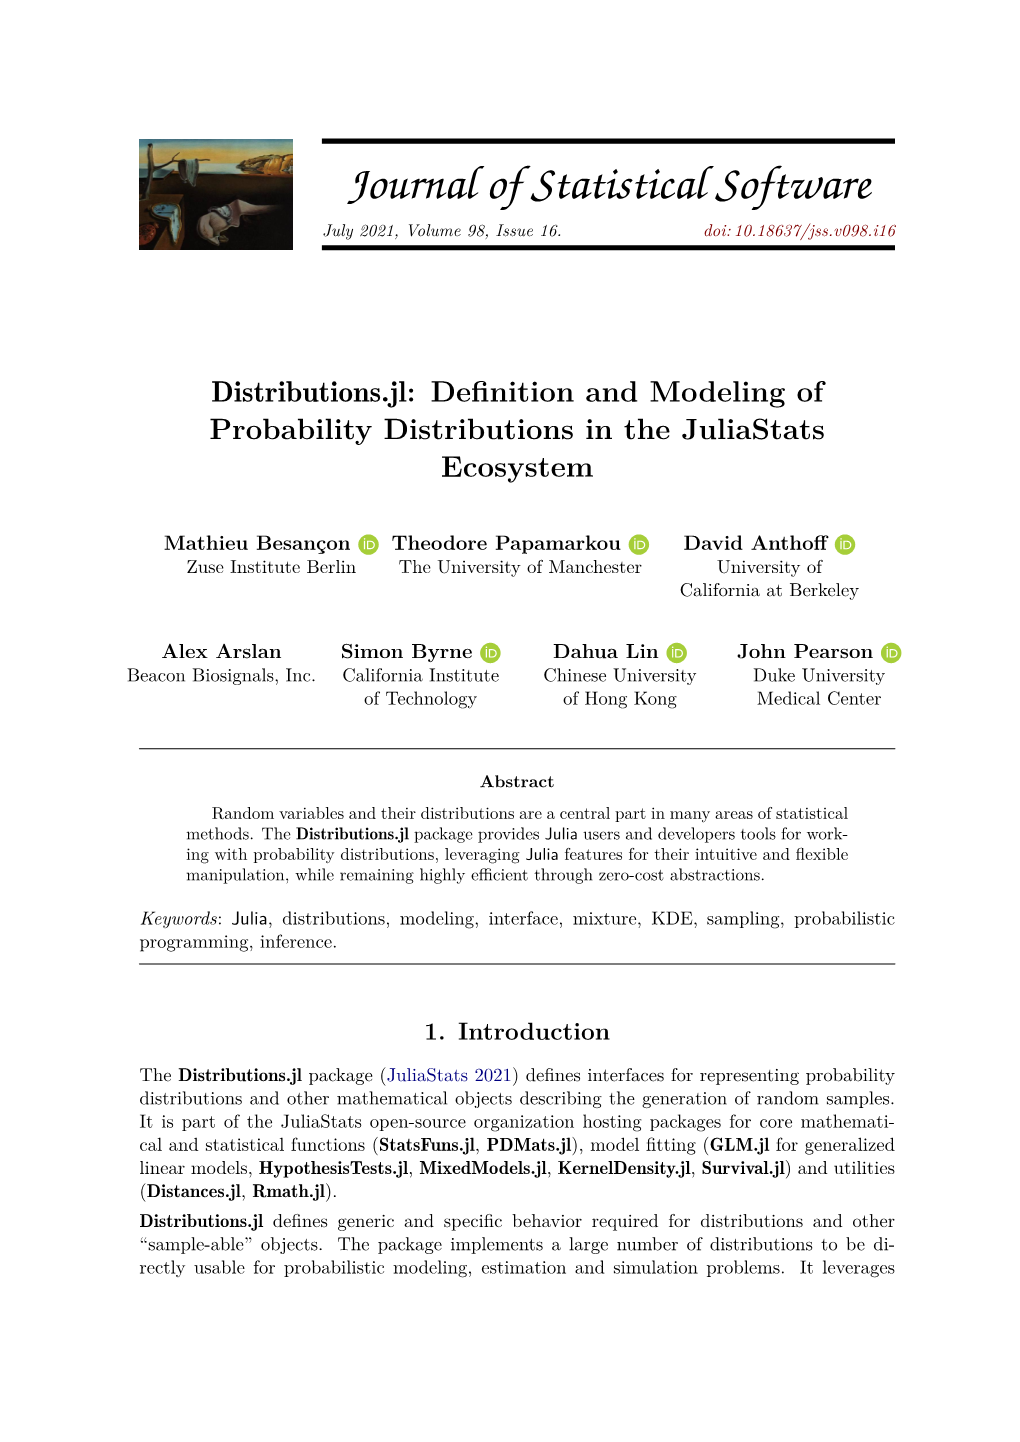 Definition and Modeling of Probability Distributions in the Juliastats